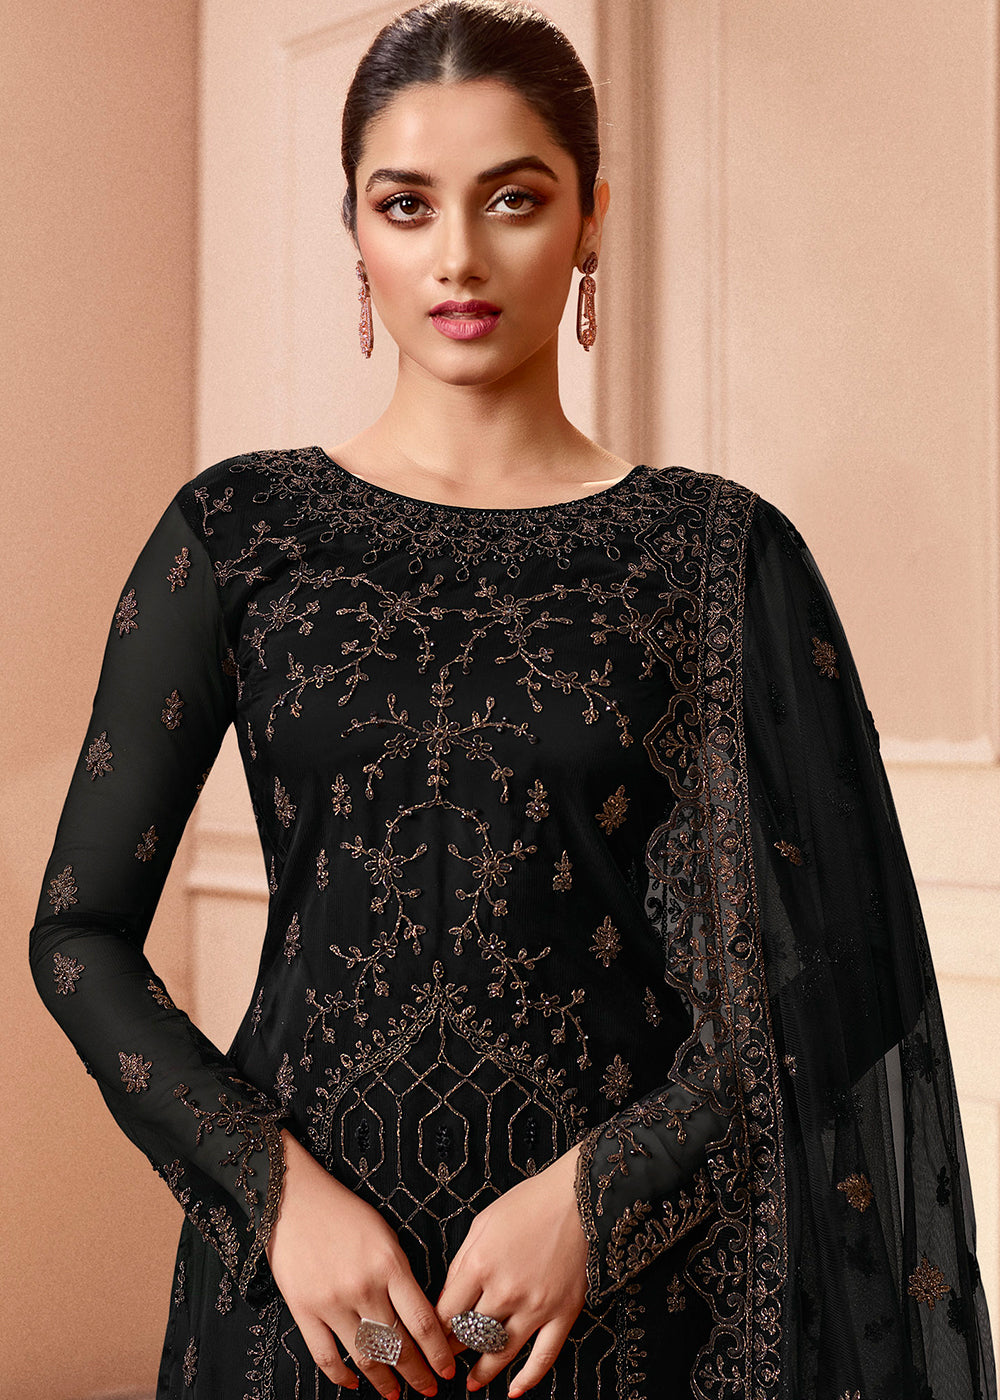 Buy Now Pant Style Classy Black Embroidered Wedding Salwar Suit Online in USA, UK, Canada & Worldwide at Empress Clothing.